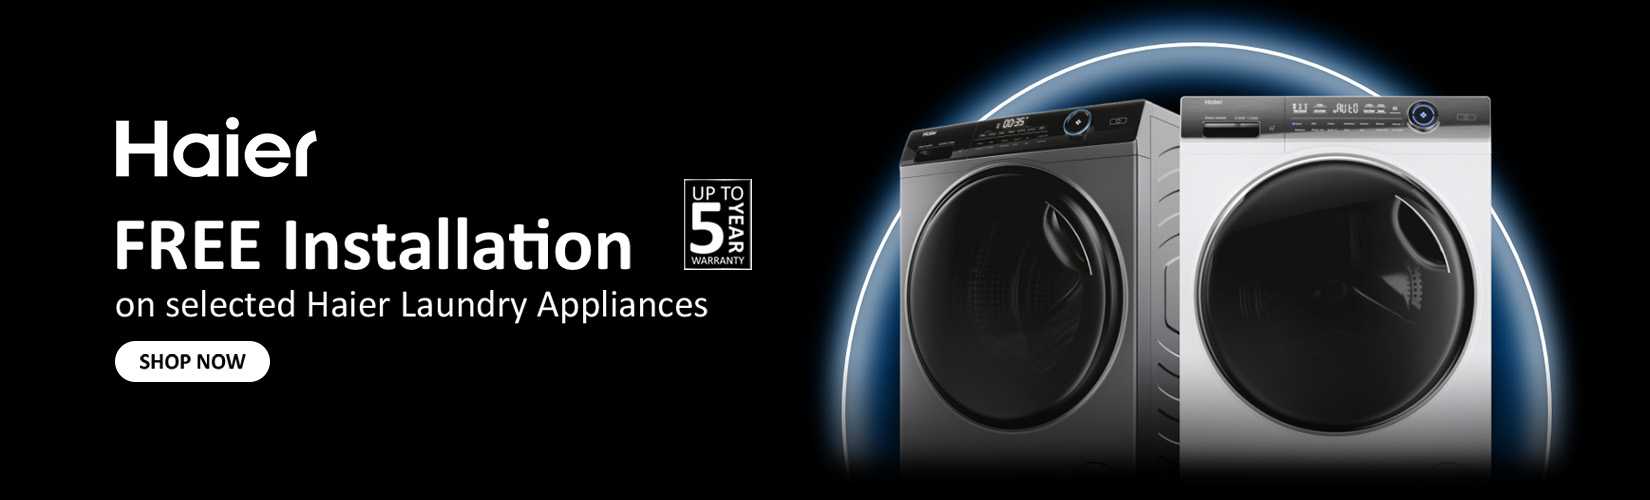 Haier. Free installation on selected Haier laundry appliances.